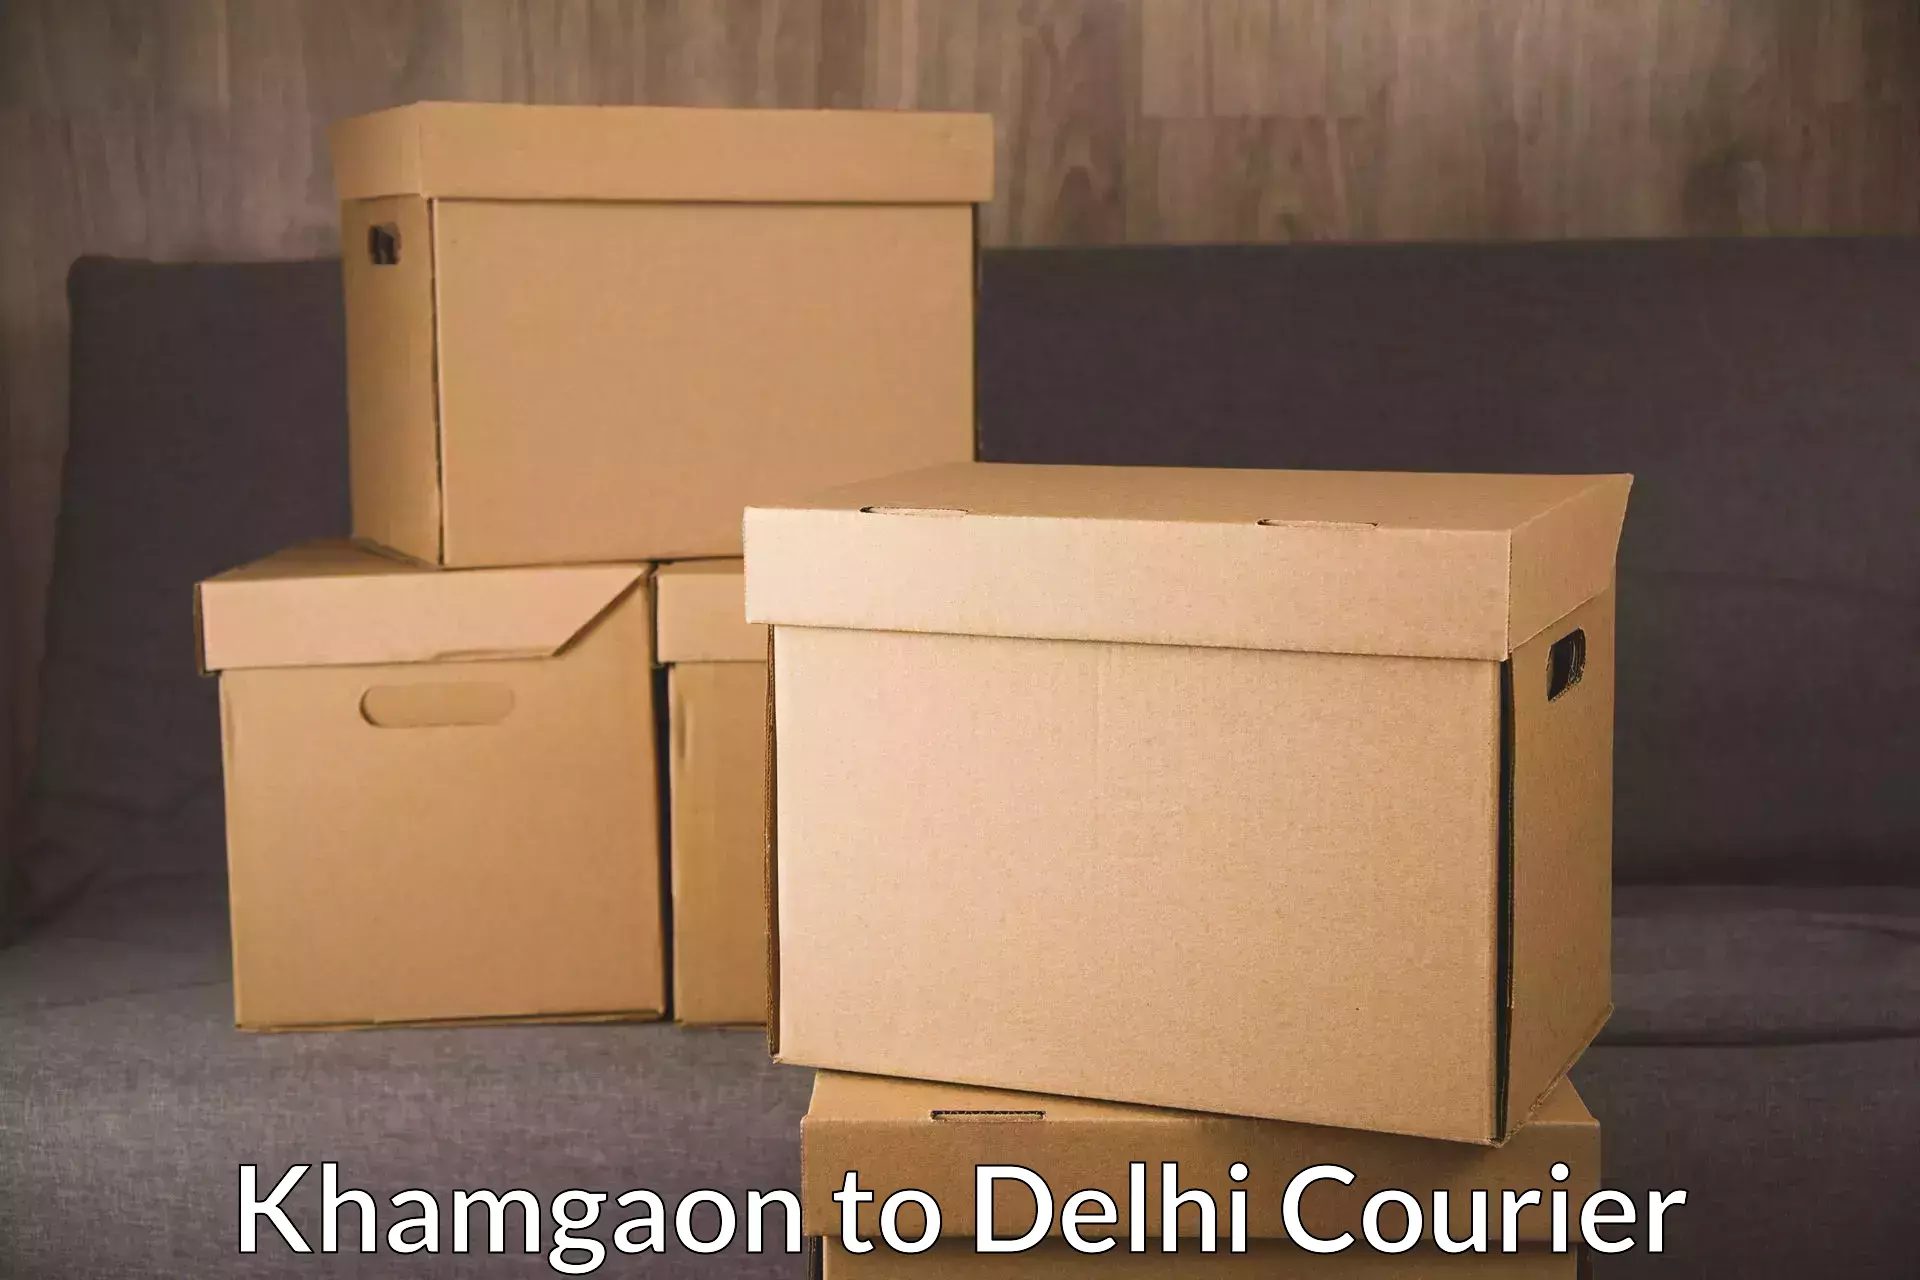 Global freight services Khamgaon to Lodhi Road